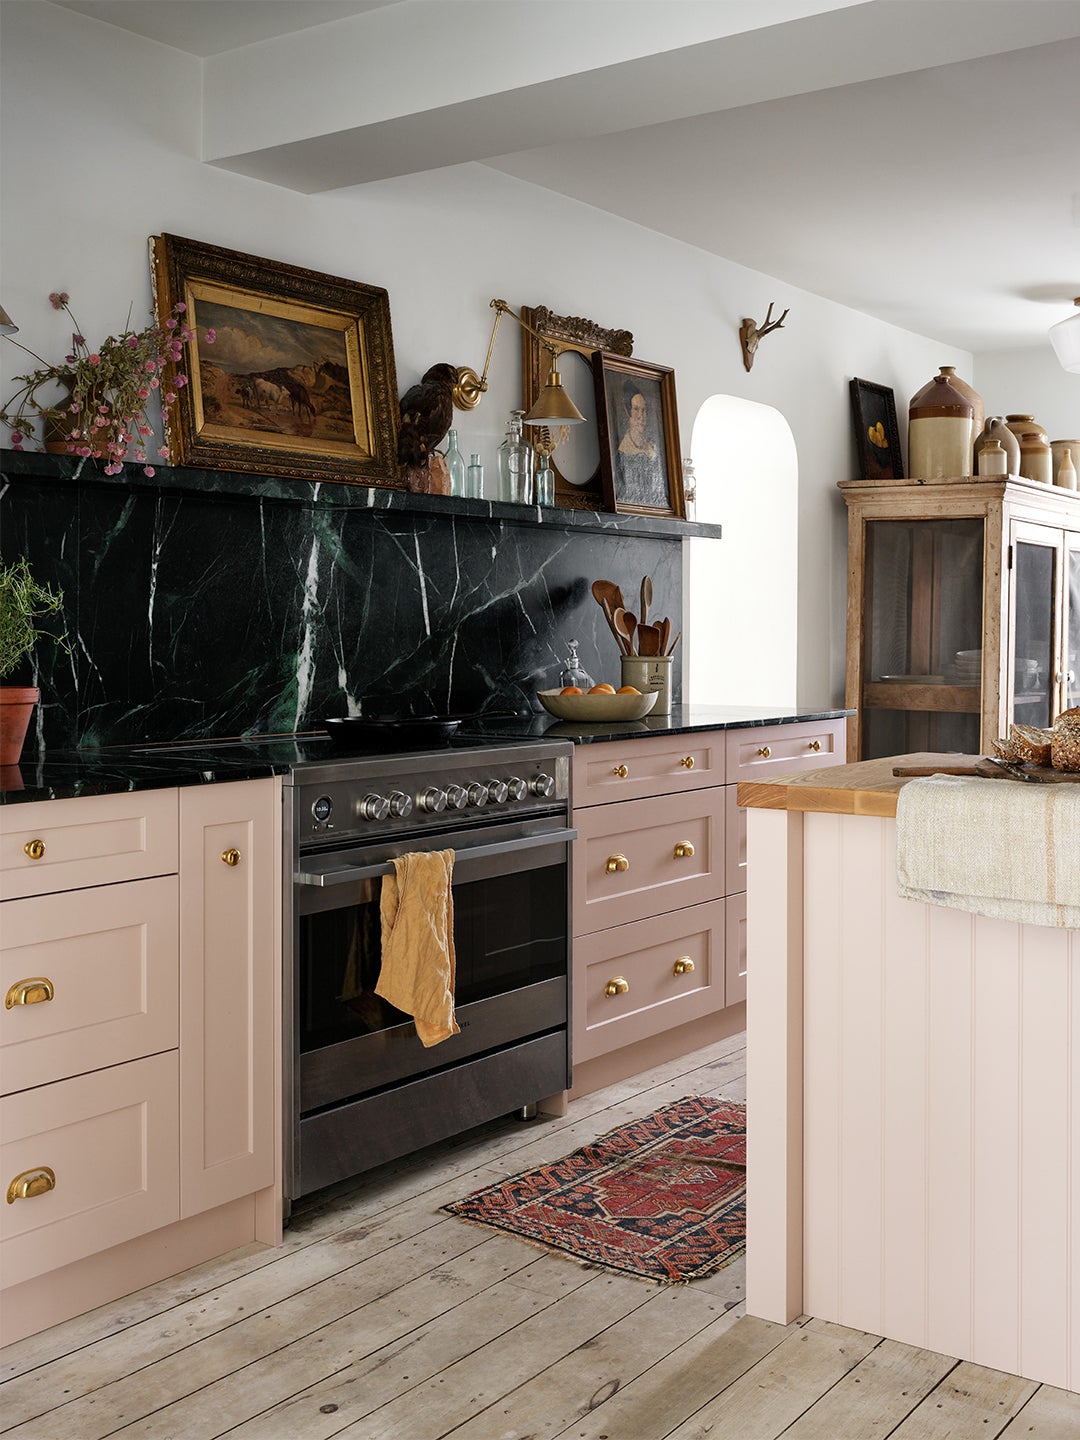 A Vintage Pie Cabinet Replaced All the Uppers in This Canadian Kitchen